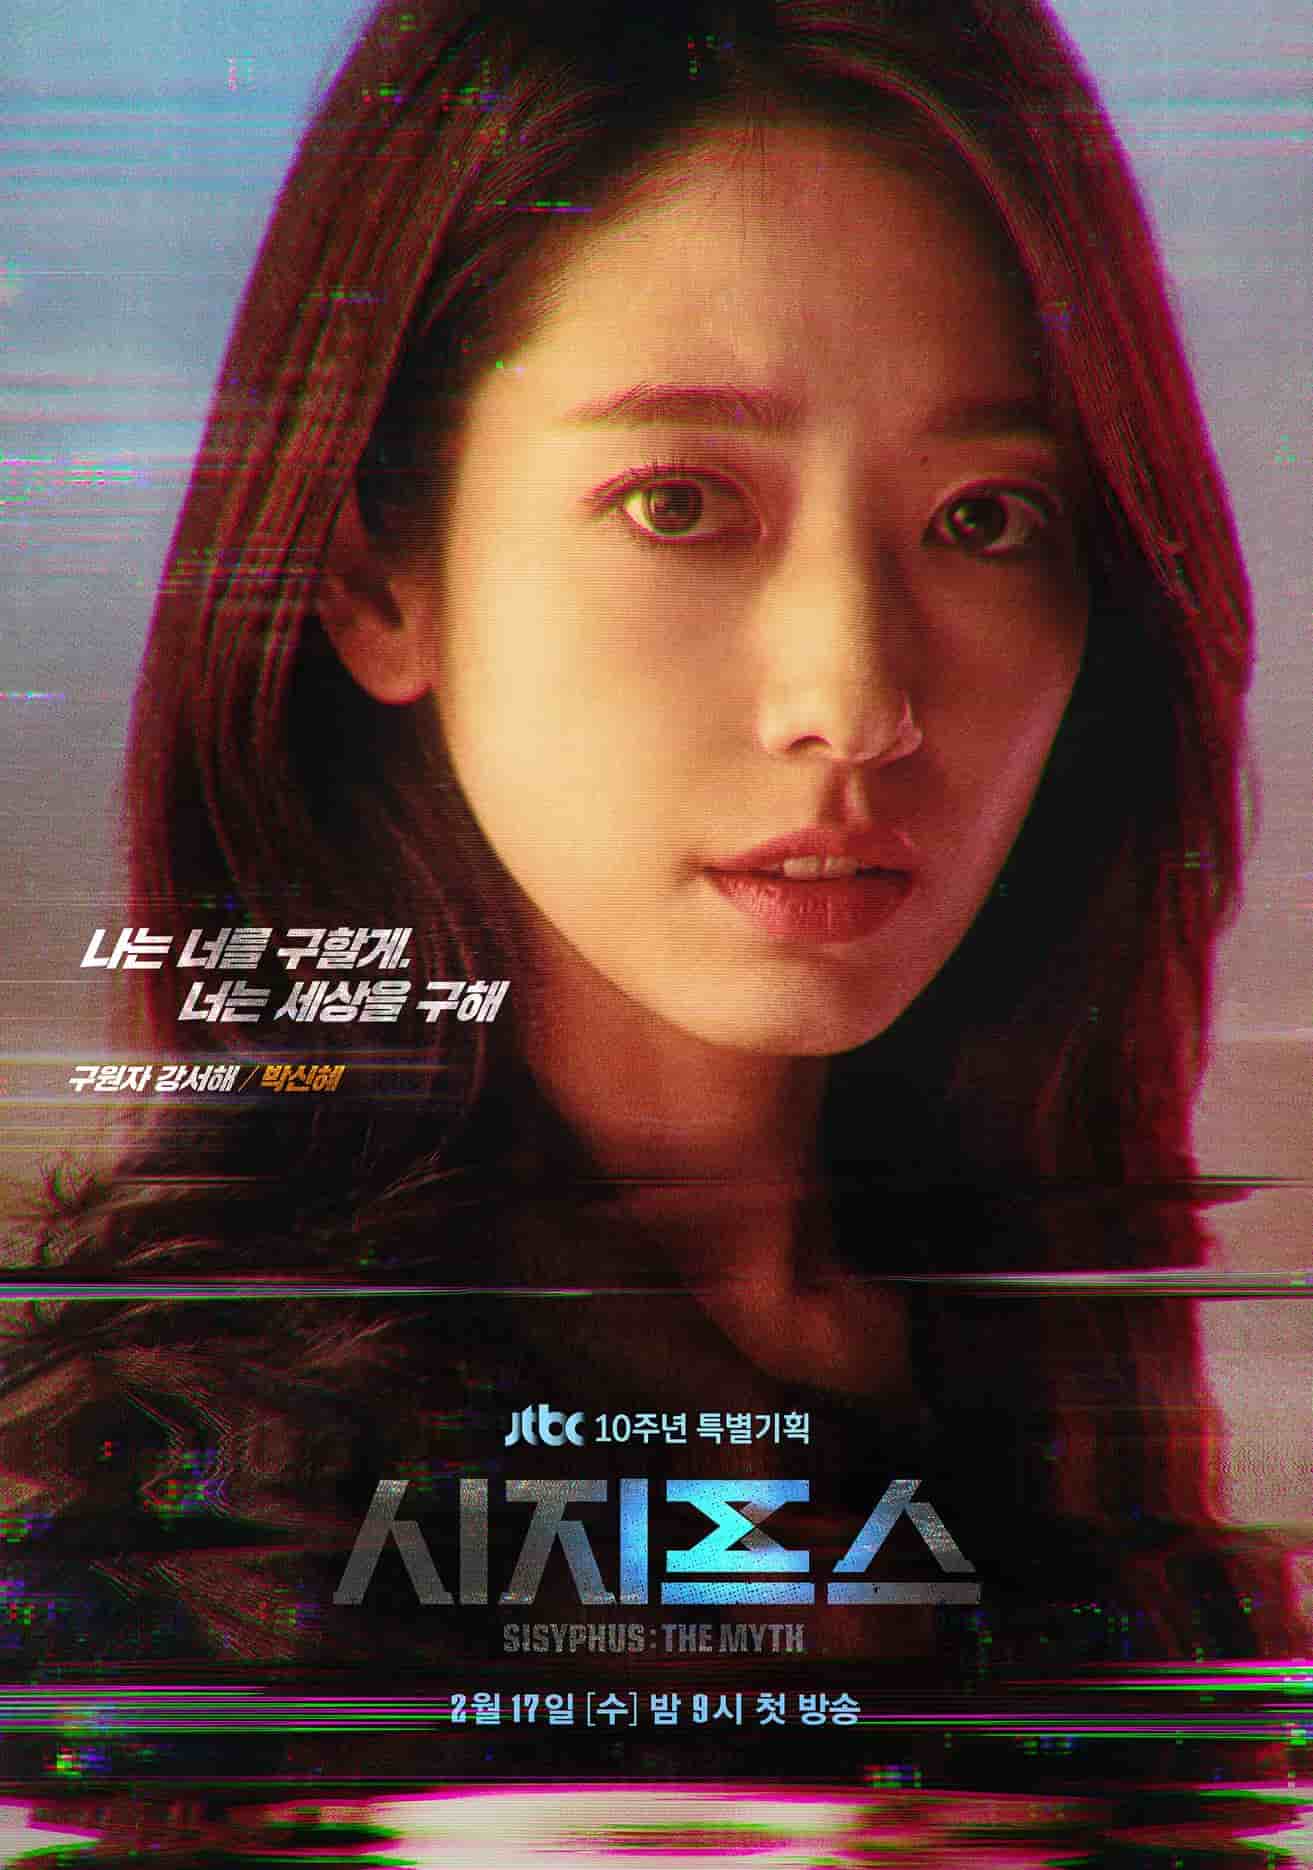 Sisyphus: The Myth - Cast, Summary, Synopsis, OST, Episode, Review